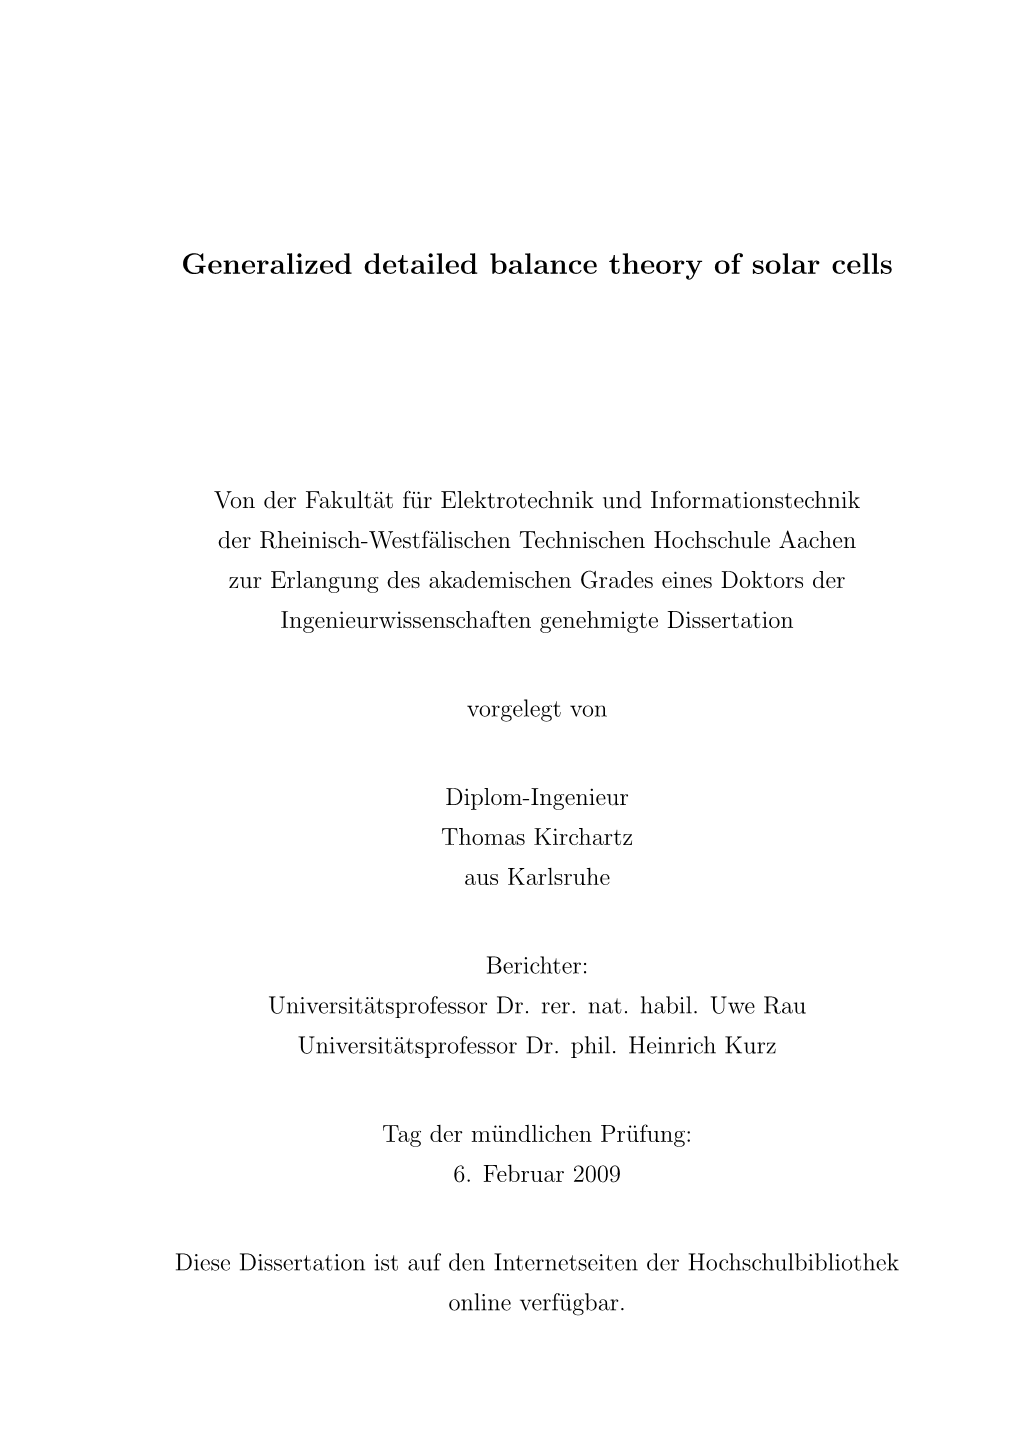 Generalized Detailed Balance Theory of Solar Cells